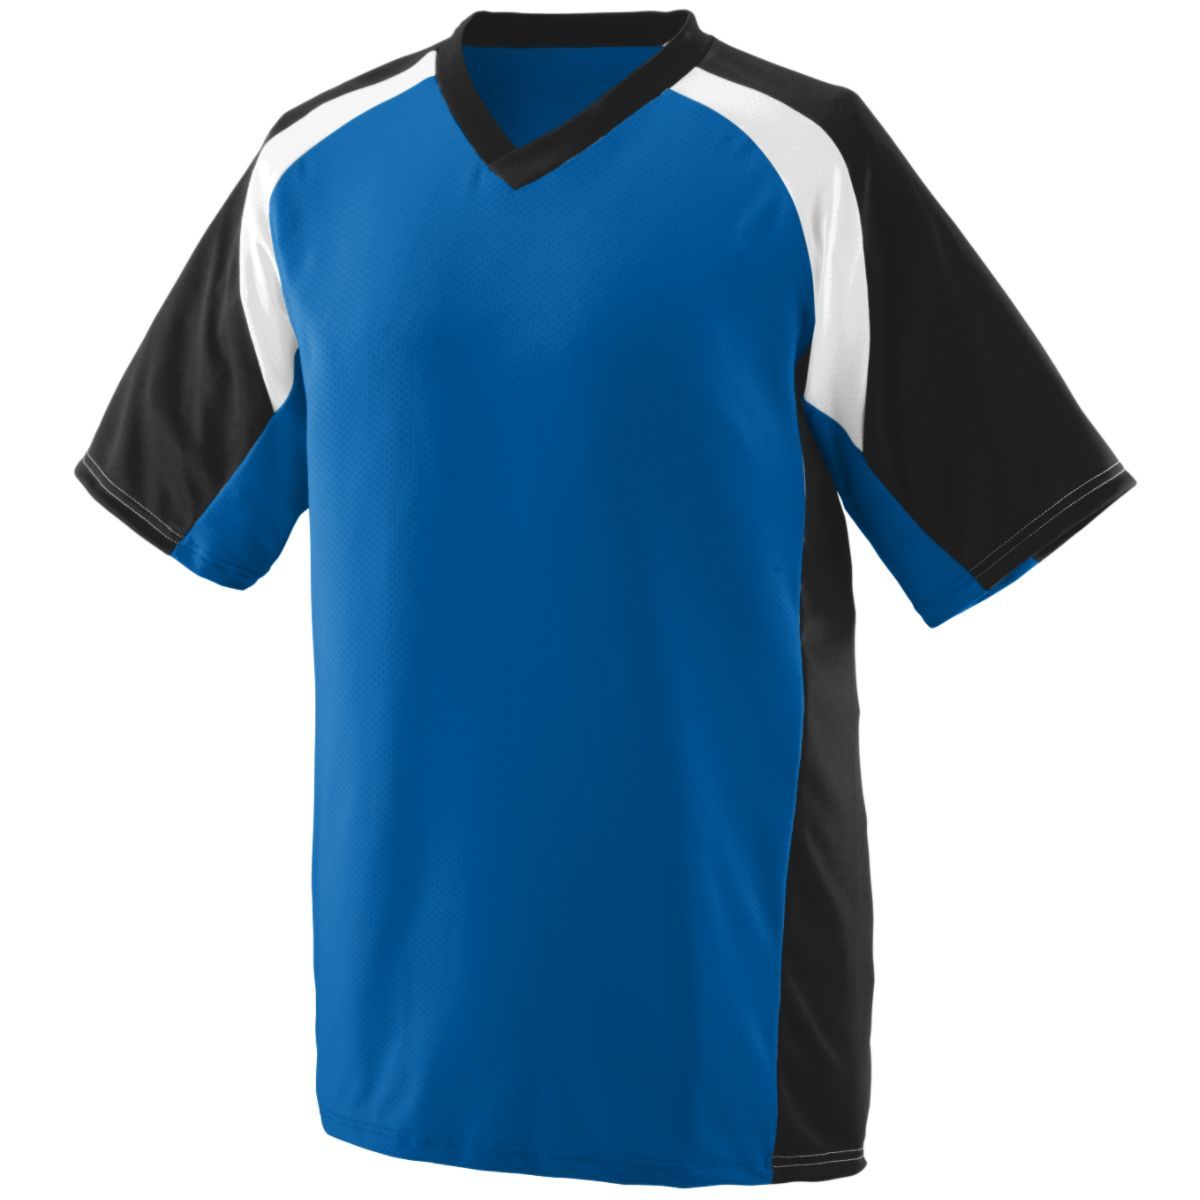 Augusta Sportswear Youth Nitro Jersey in Royal/Black/White  -Part of the Youth, Youth-Jersey, Augusta-Products, Football, Shirts, All-Sports, All-Sports-1 product lines at KanaleyCreations.com